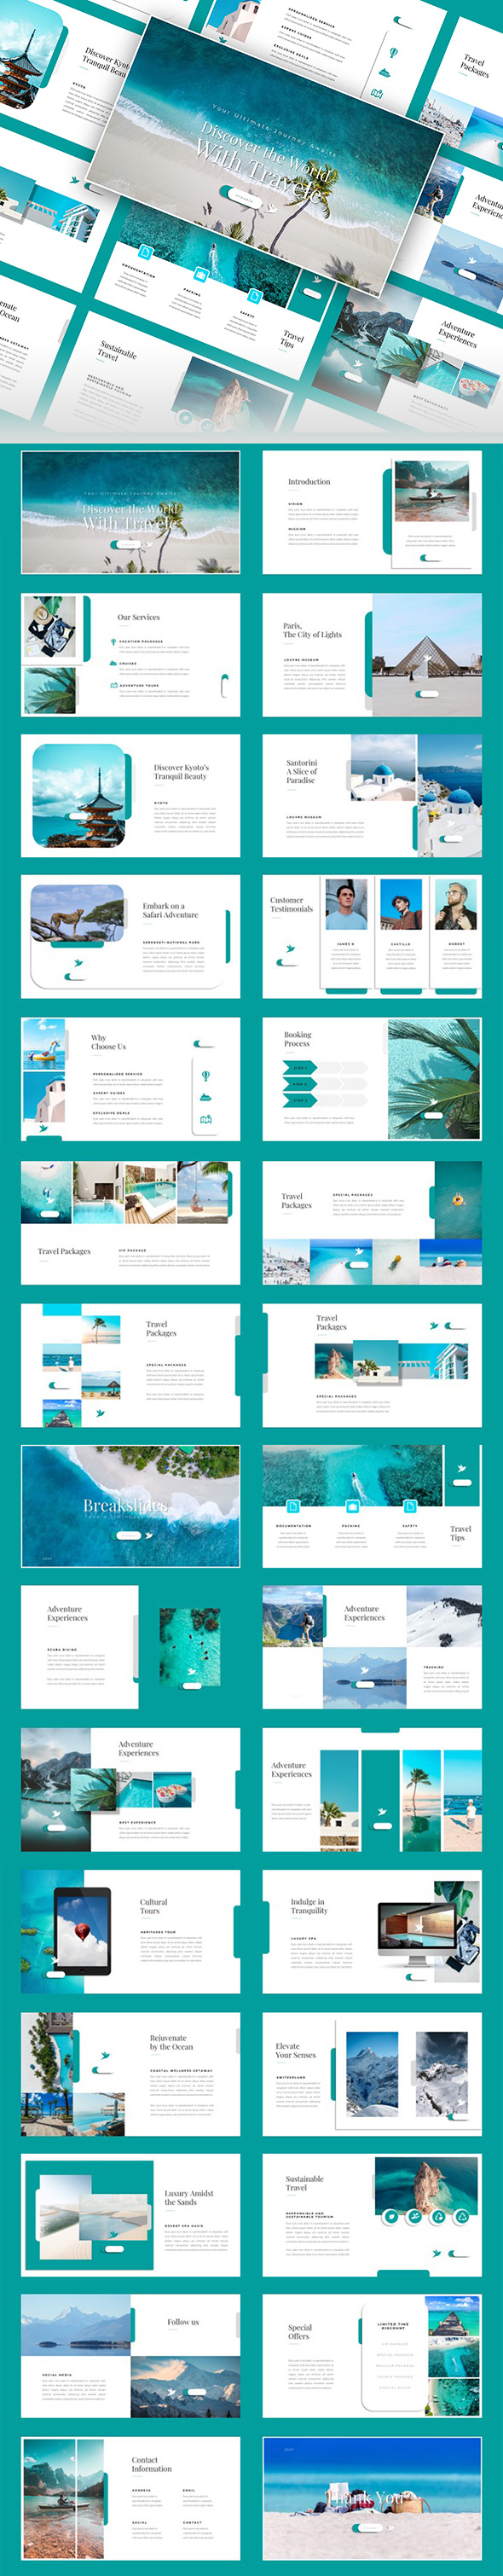 Travele - Travel agency Powerpoint Template